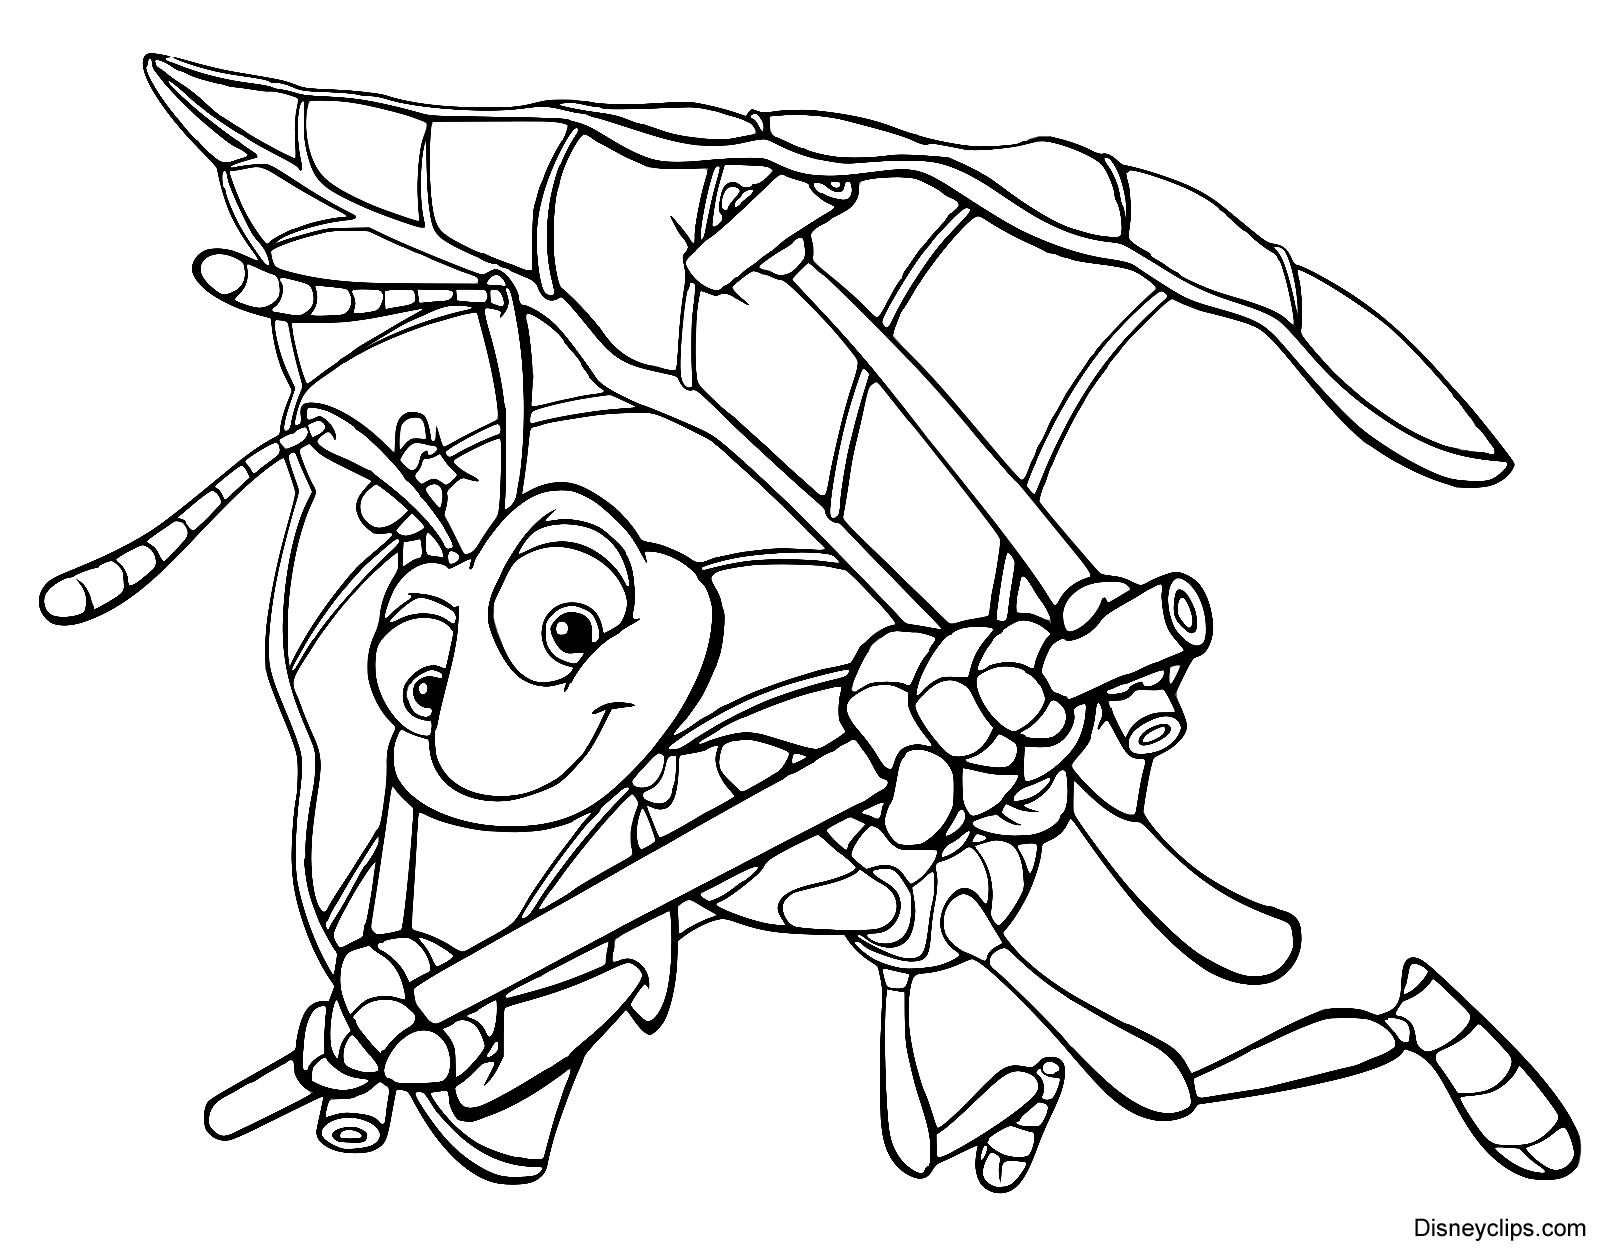 a bugs life coloring pages disney - photo #21